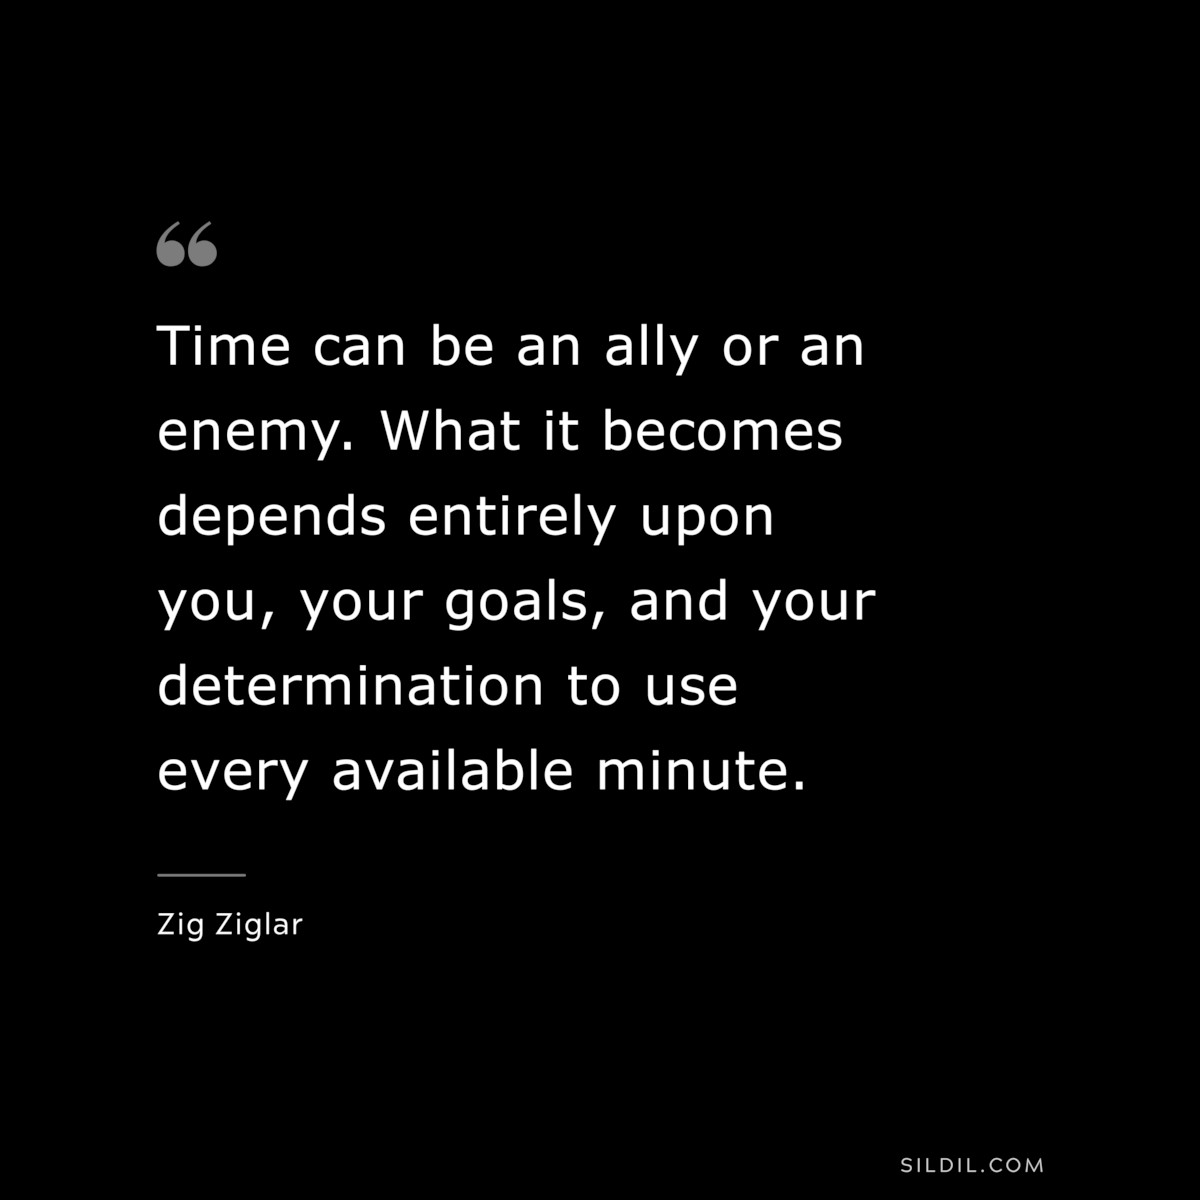 Time can be an ally or an enemy. What it becomes depends entirely upon you, your goals, and your determination to use every available minute. ― Zig Ziglar